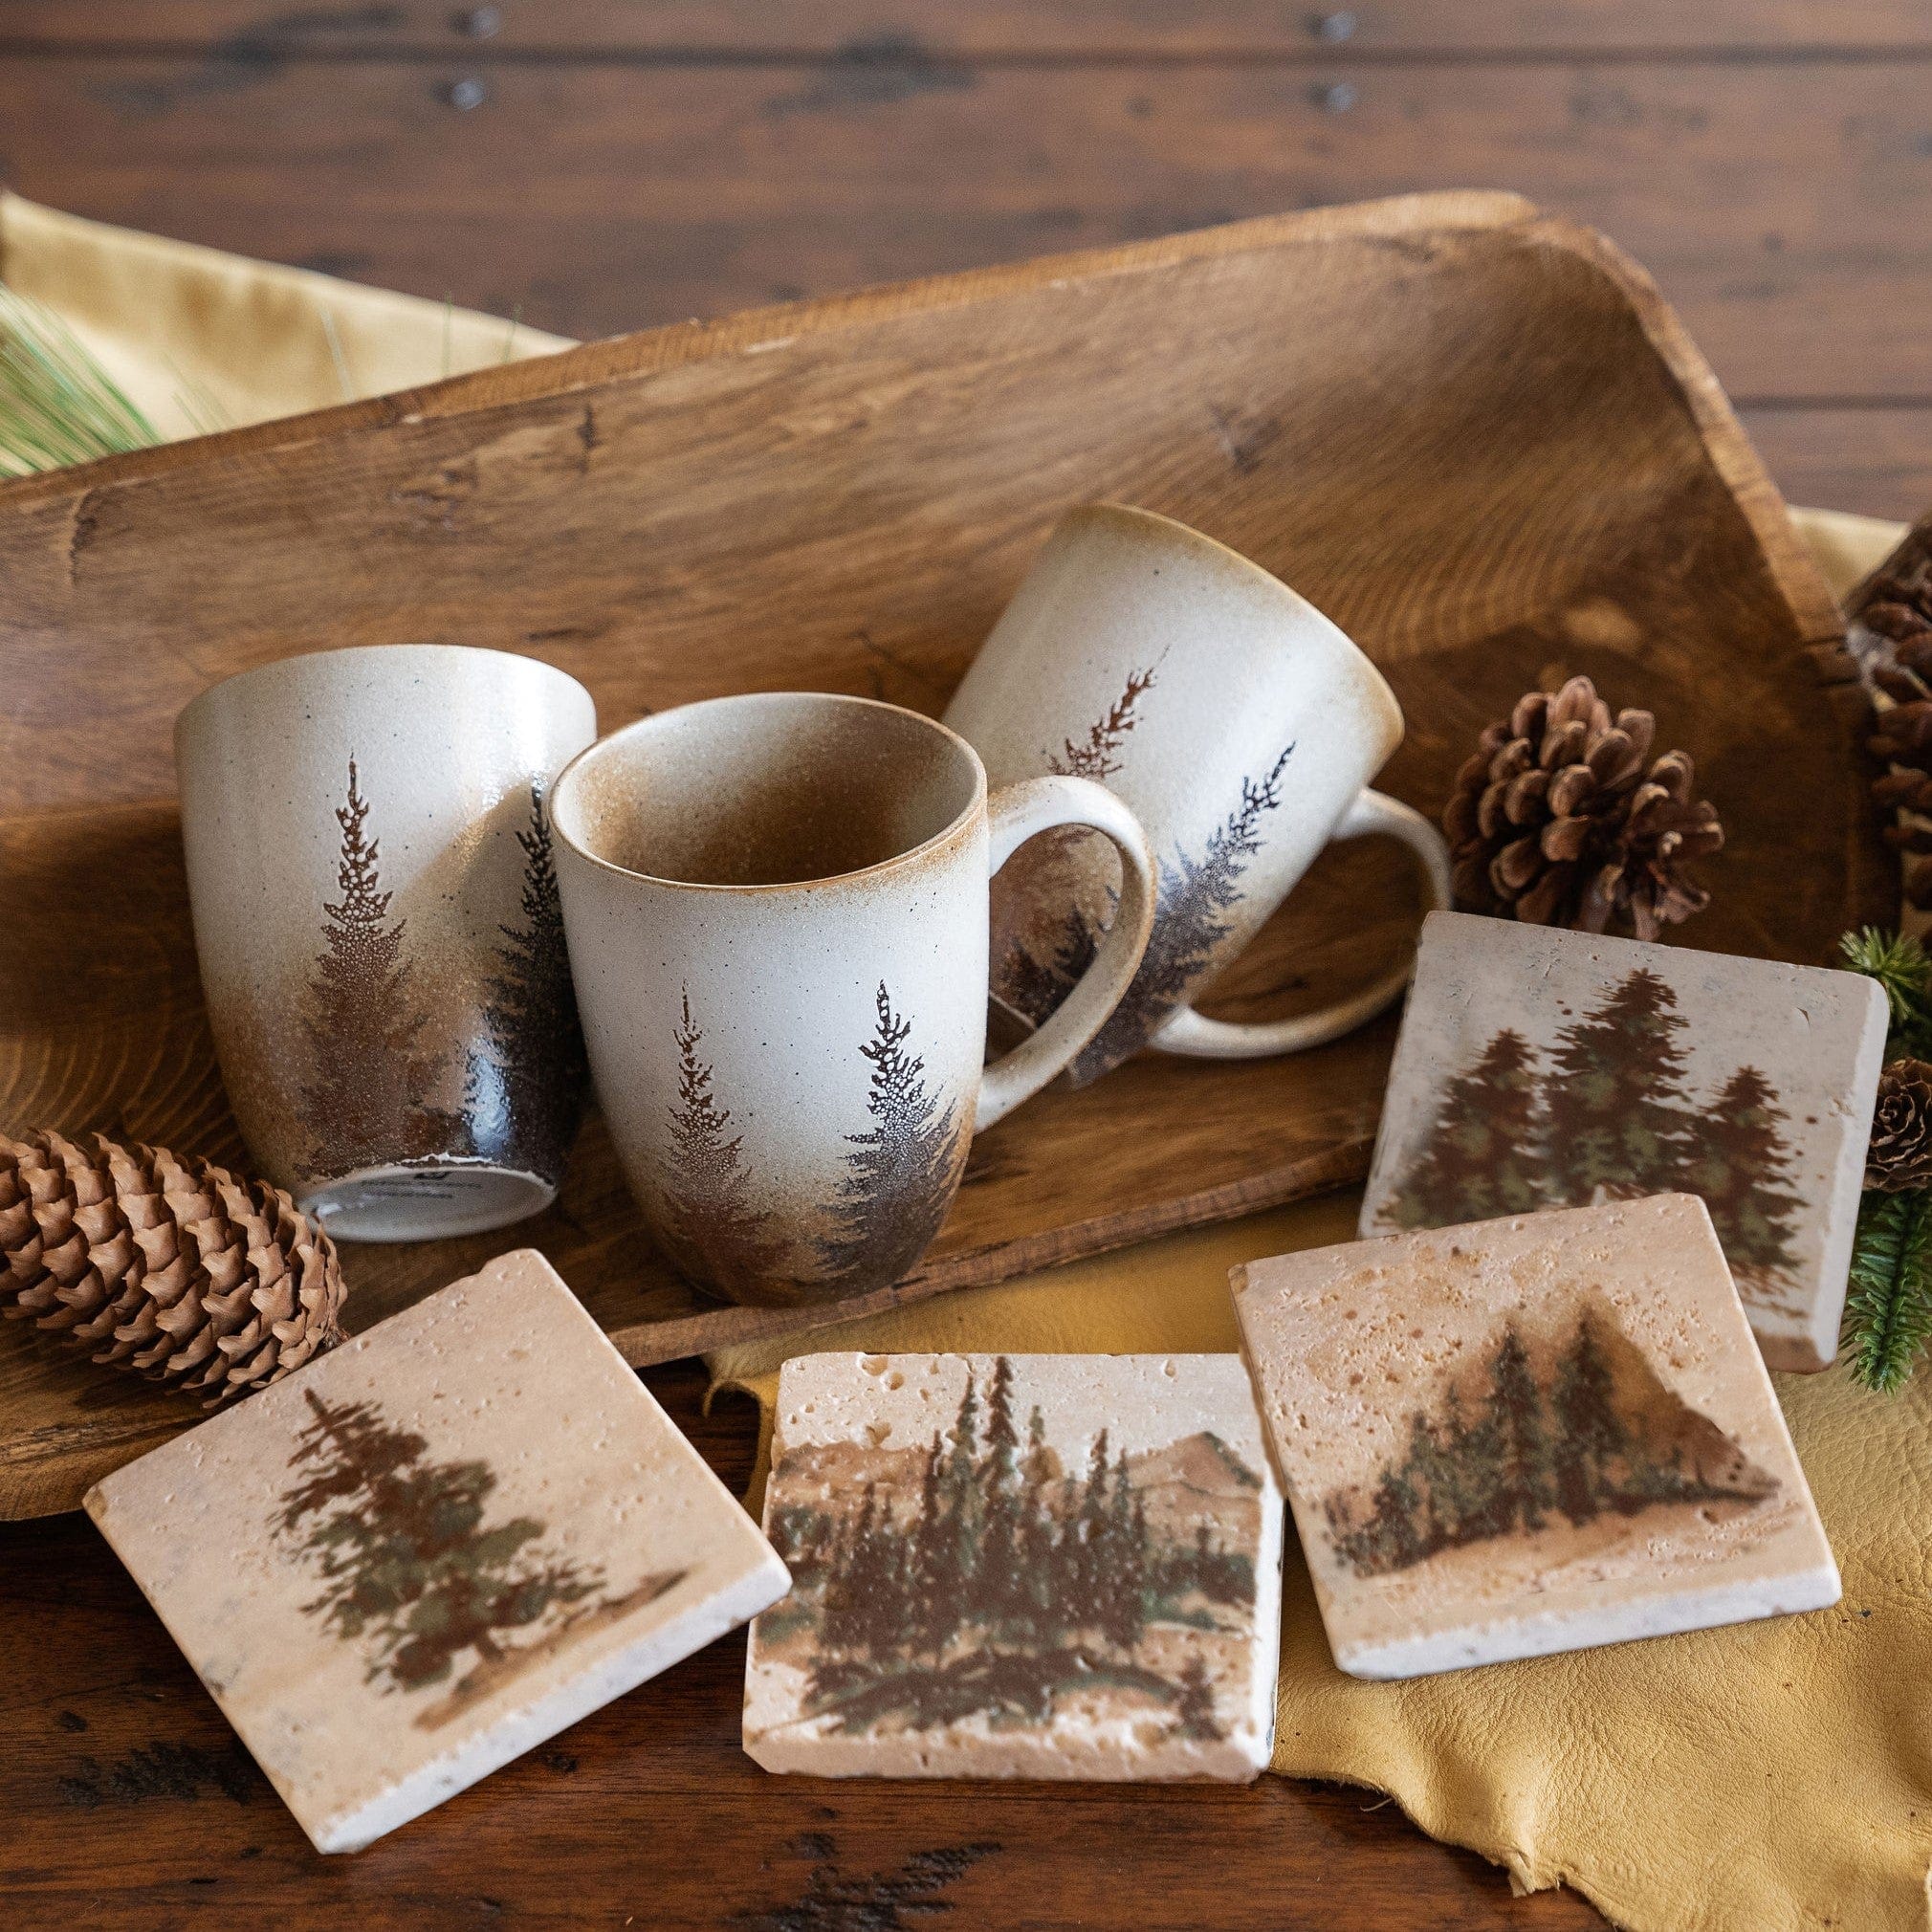 http://www.hiendaccents.com/cdn/shop/products/hiend-accents-kitchen-lifestyle-clearwater-pines-mug-scenery-tree-coaster-8pc-set-lf1901k2-clearwater-pines-mug-scenery-tree-coaster-8pc-set-hiend-accents-29700854415463.jpg?v=1662549288